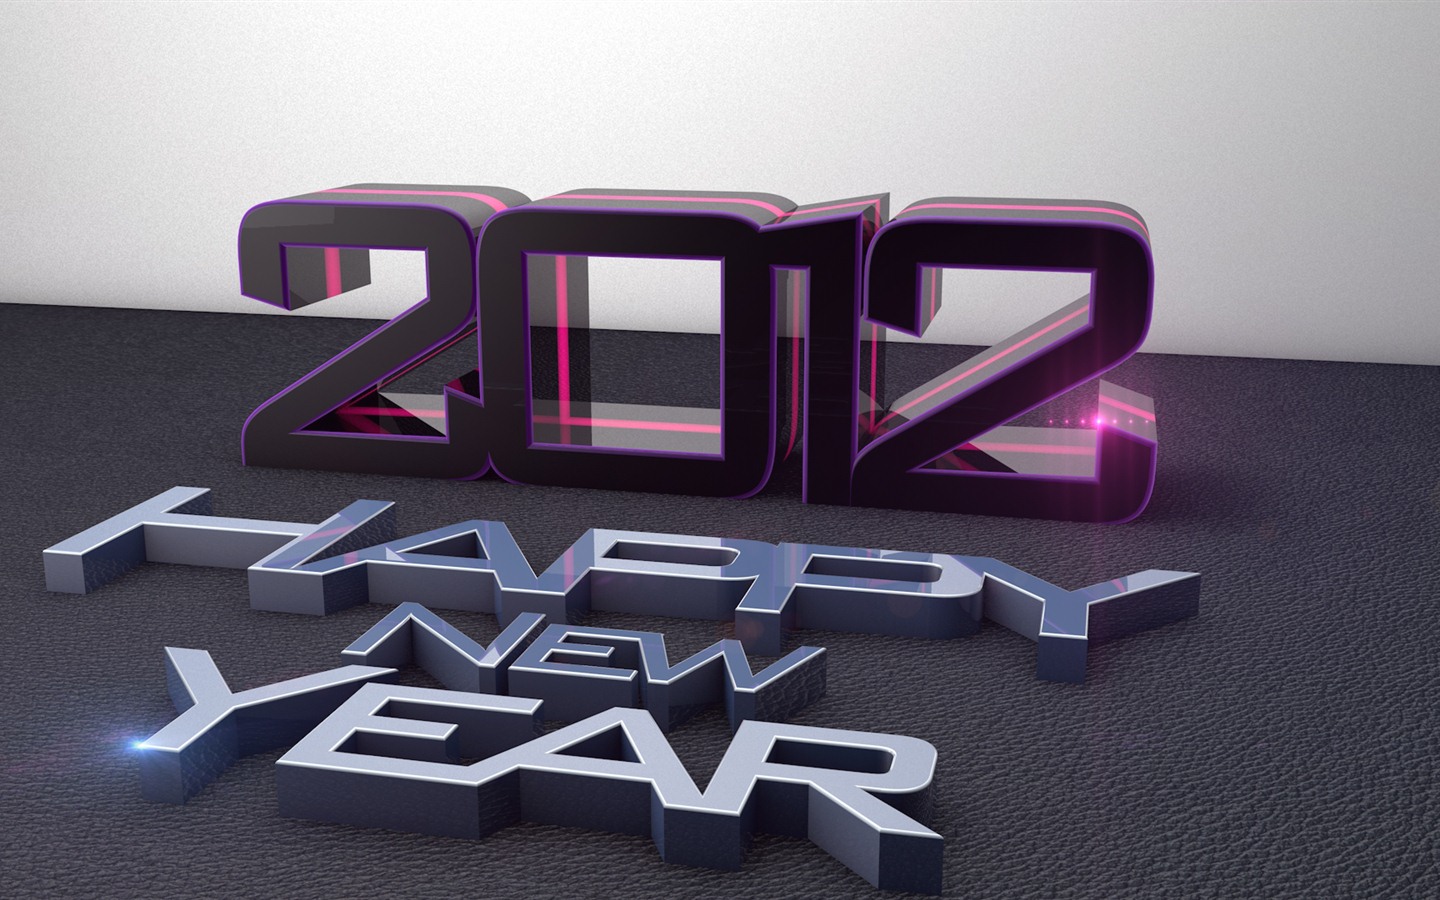 2012 New Year wallpapers (1) #6 - 1440x900